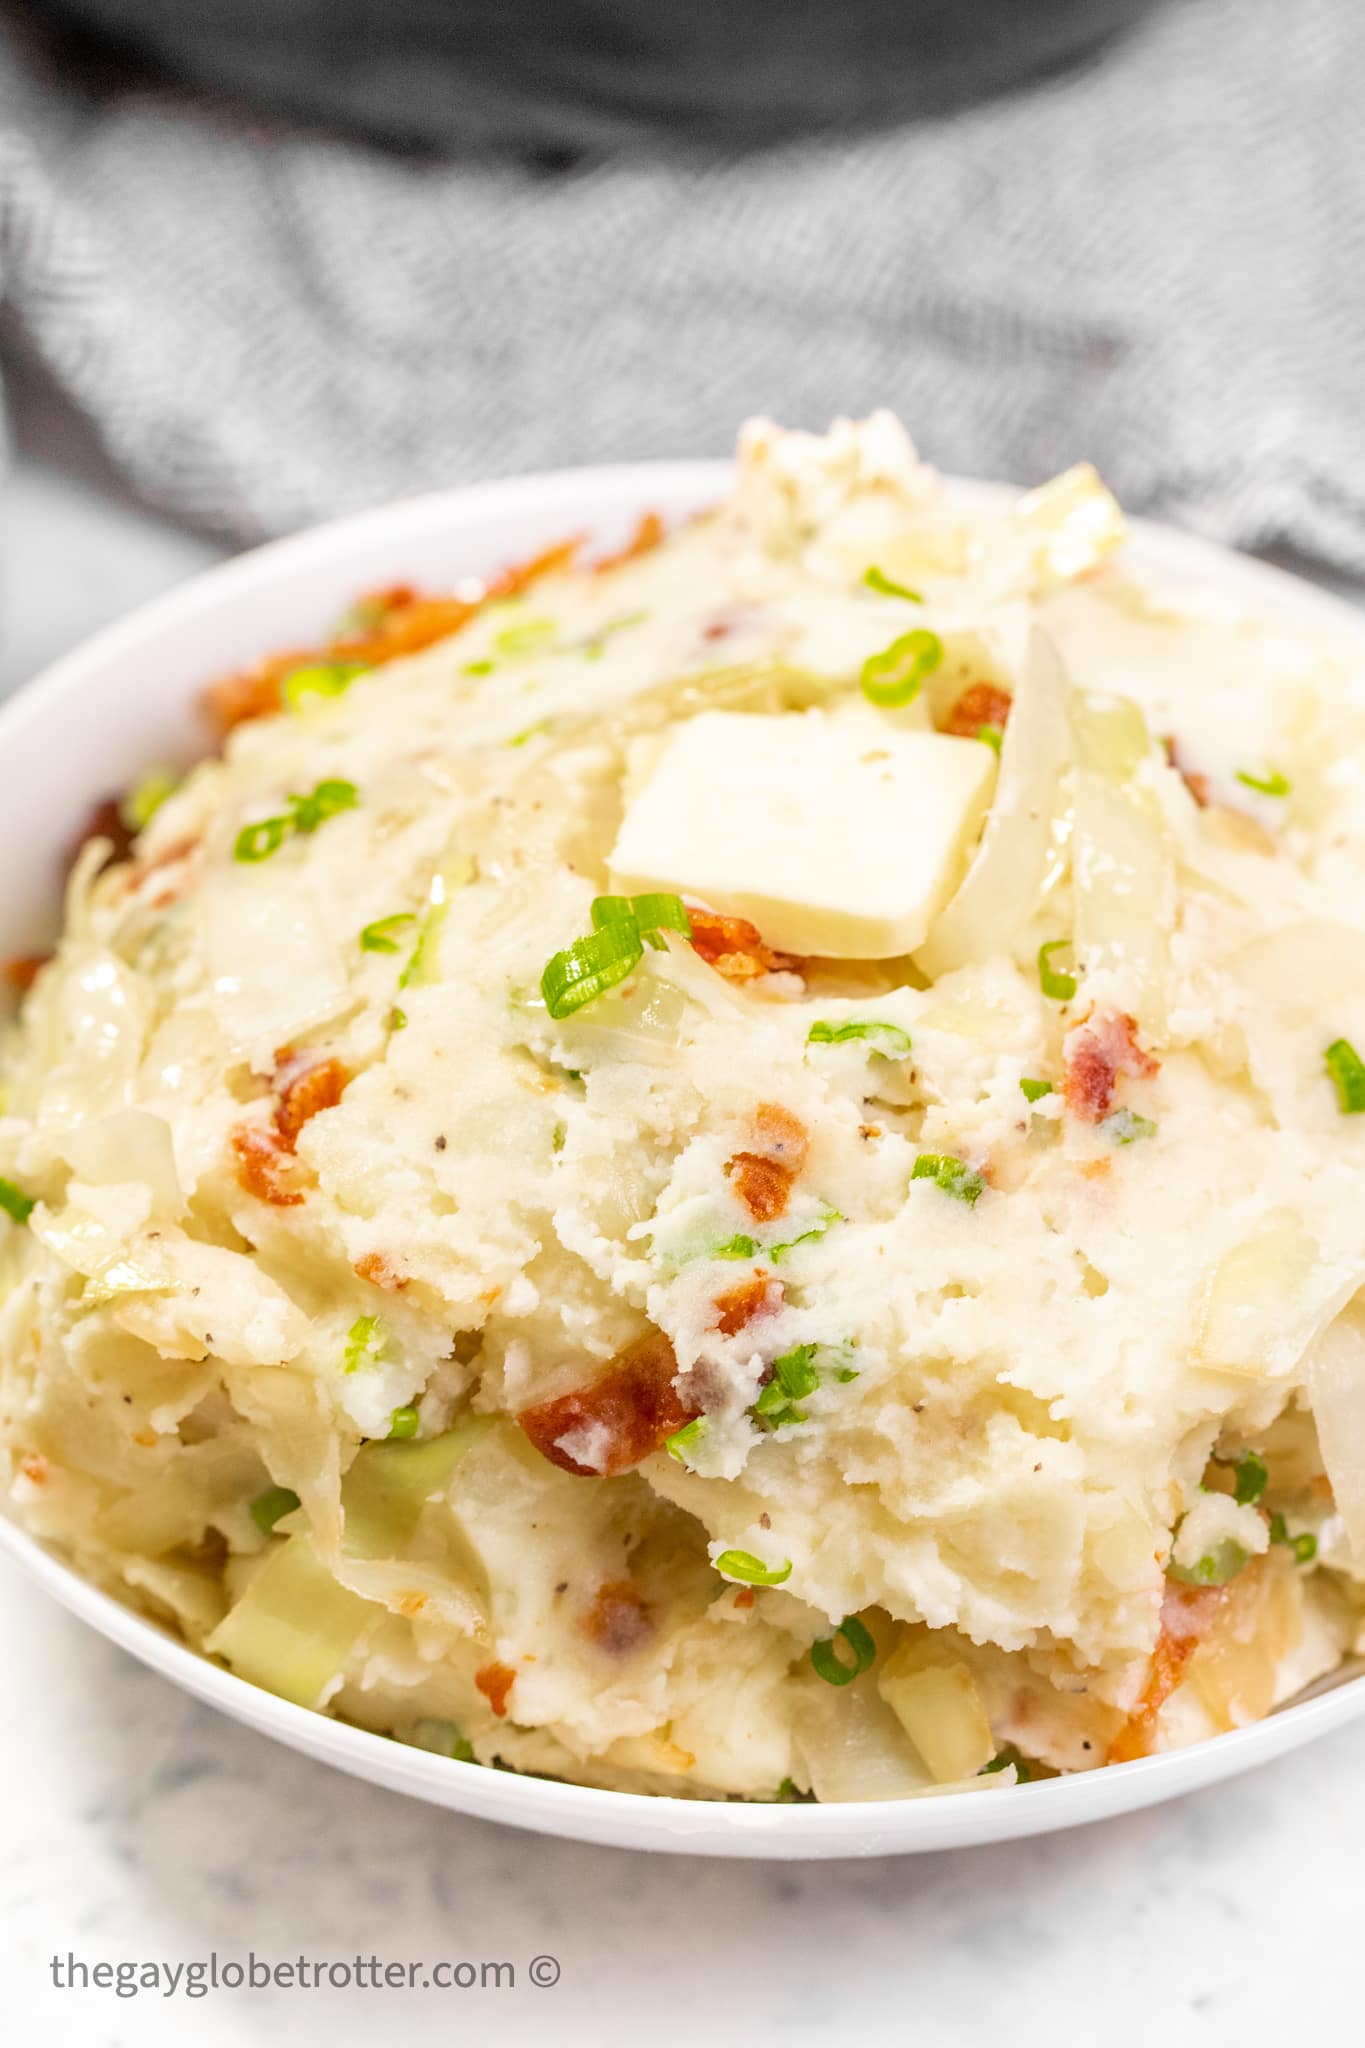 Irish Colcannon {Cabbage and Potatoes} - The Gay Globetrotter